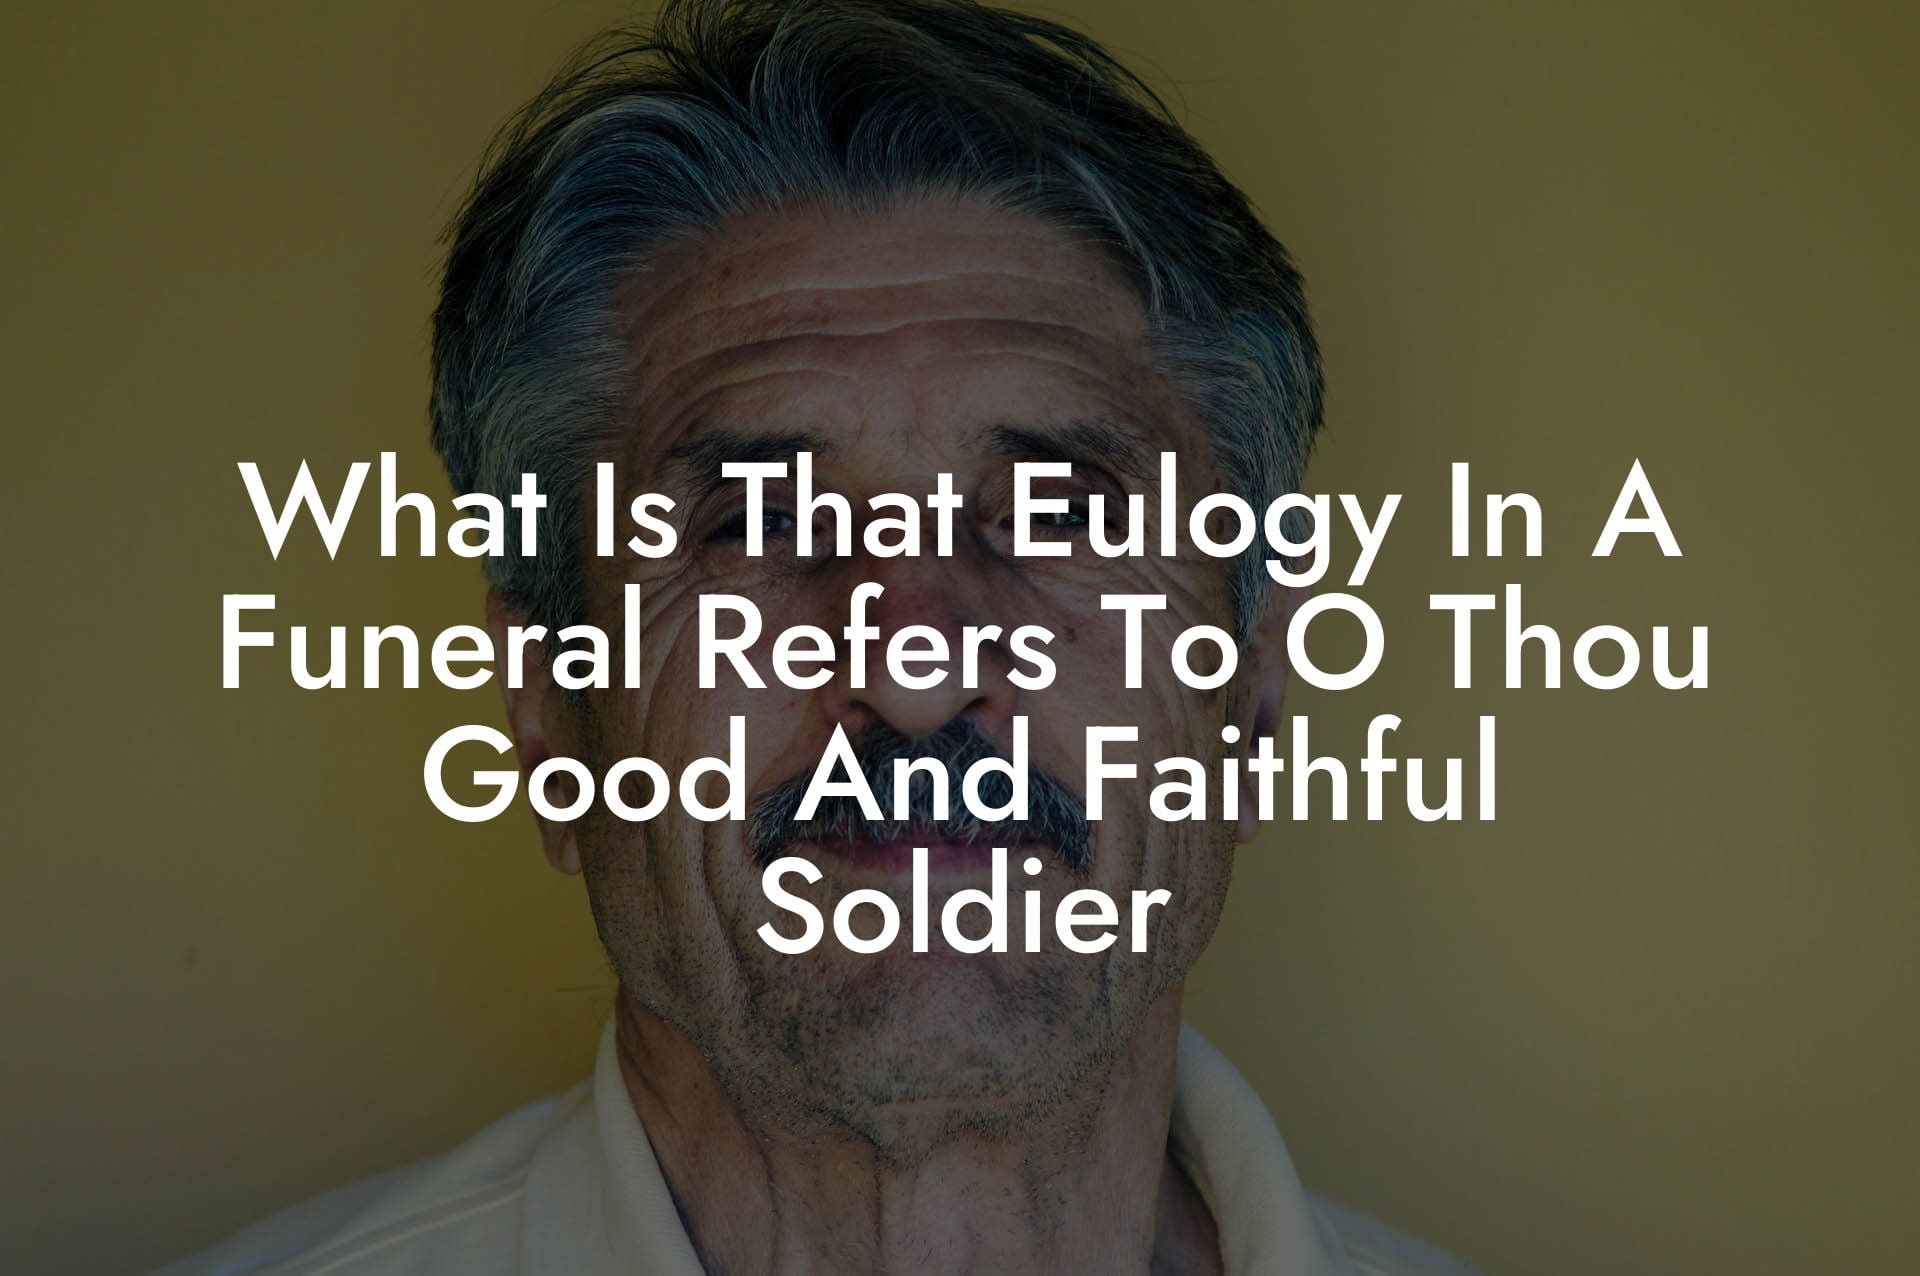 What Is That Eulogy In A Funeral Refers To O Thou Good And Faithful Soldier